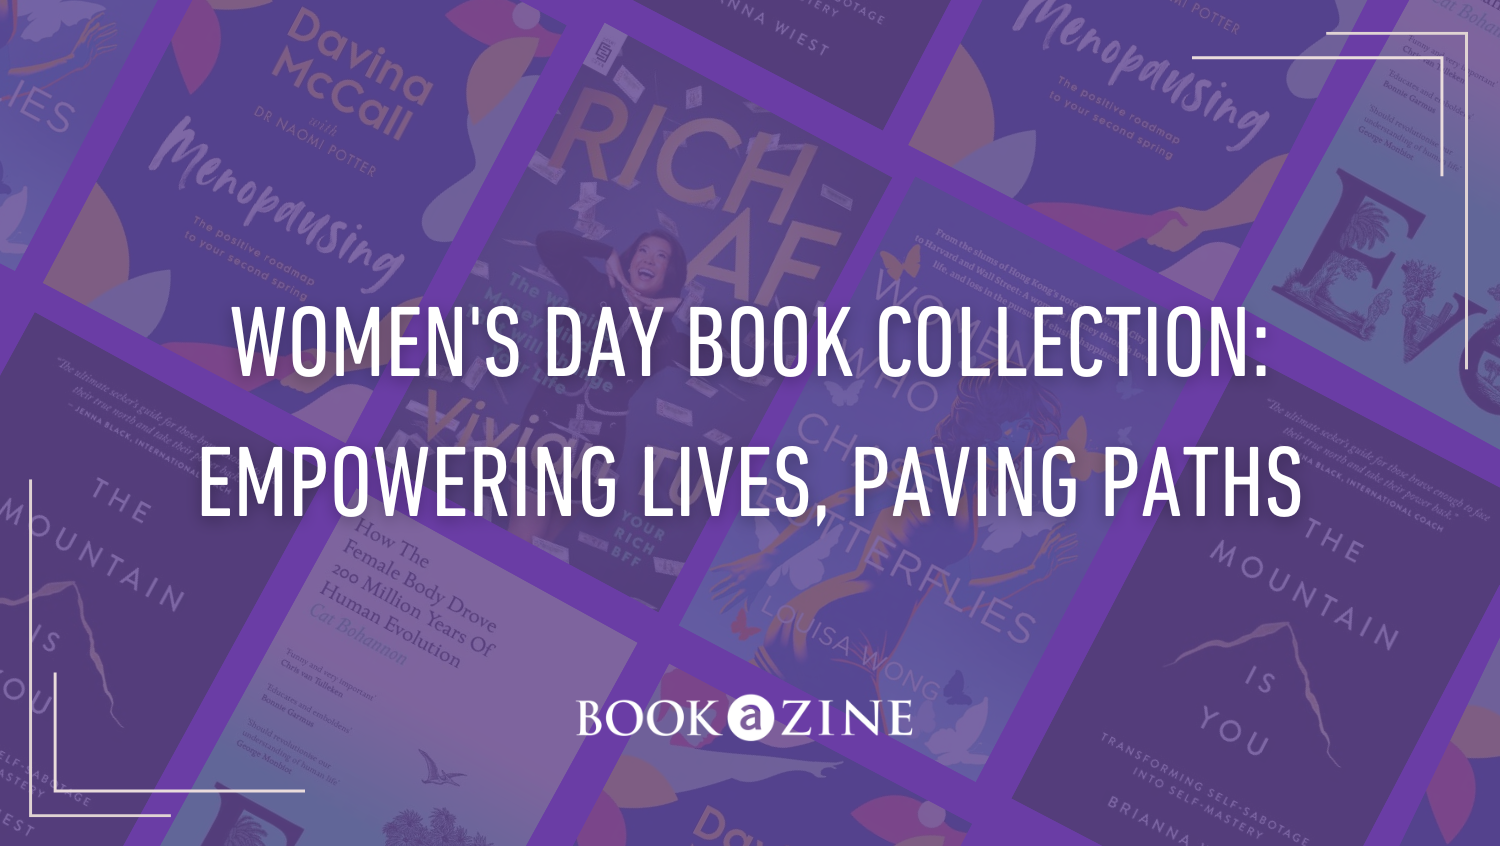 Women's Day Book Collection: Empowering Lives, Paving Paths